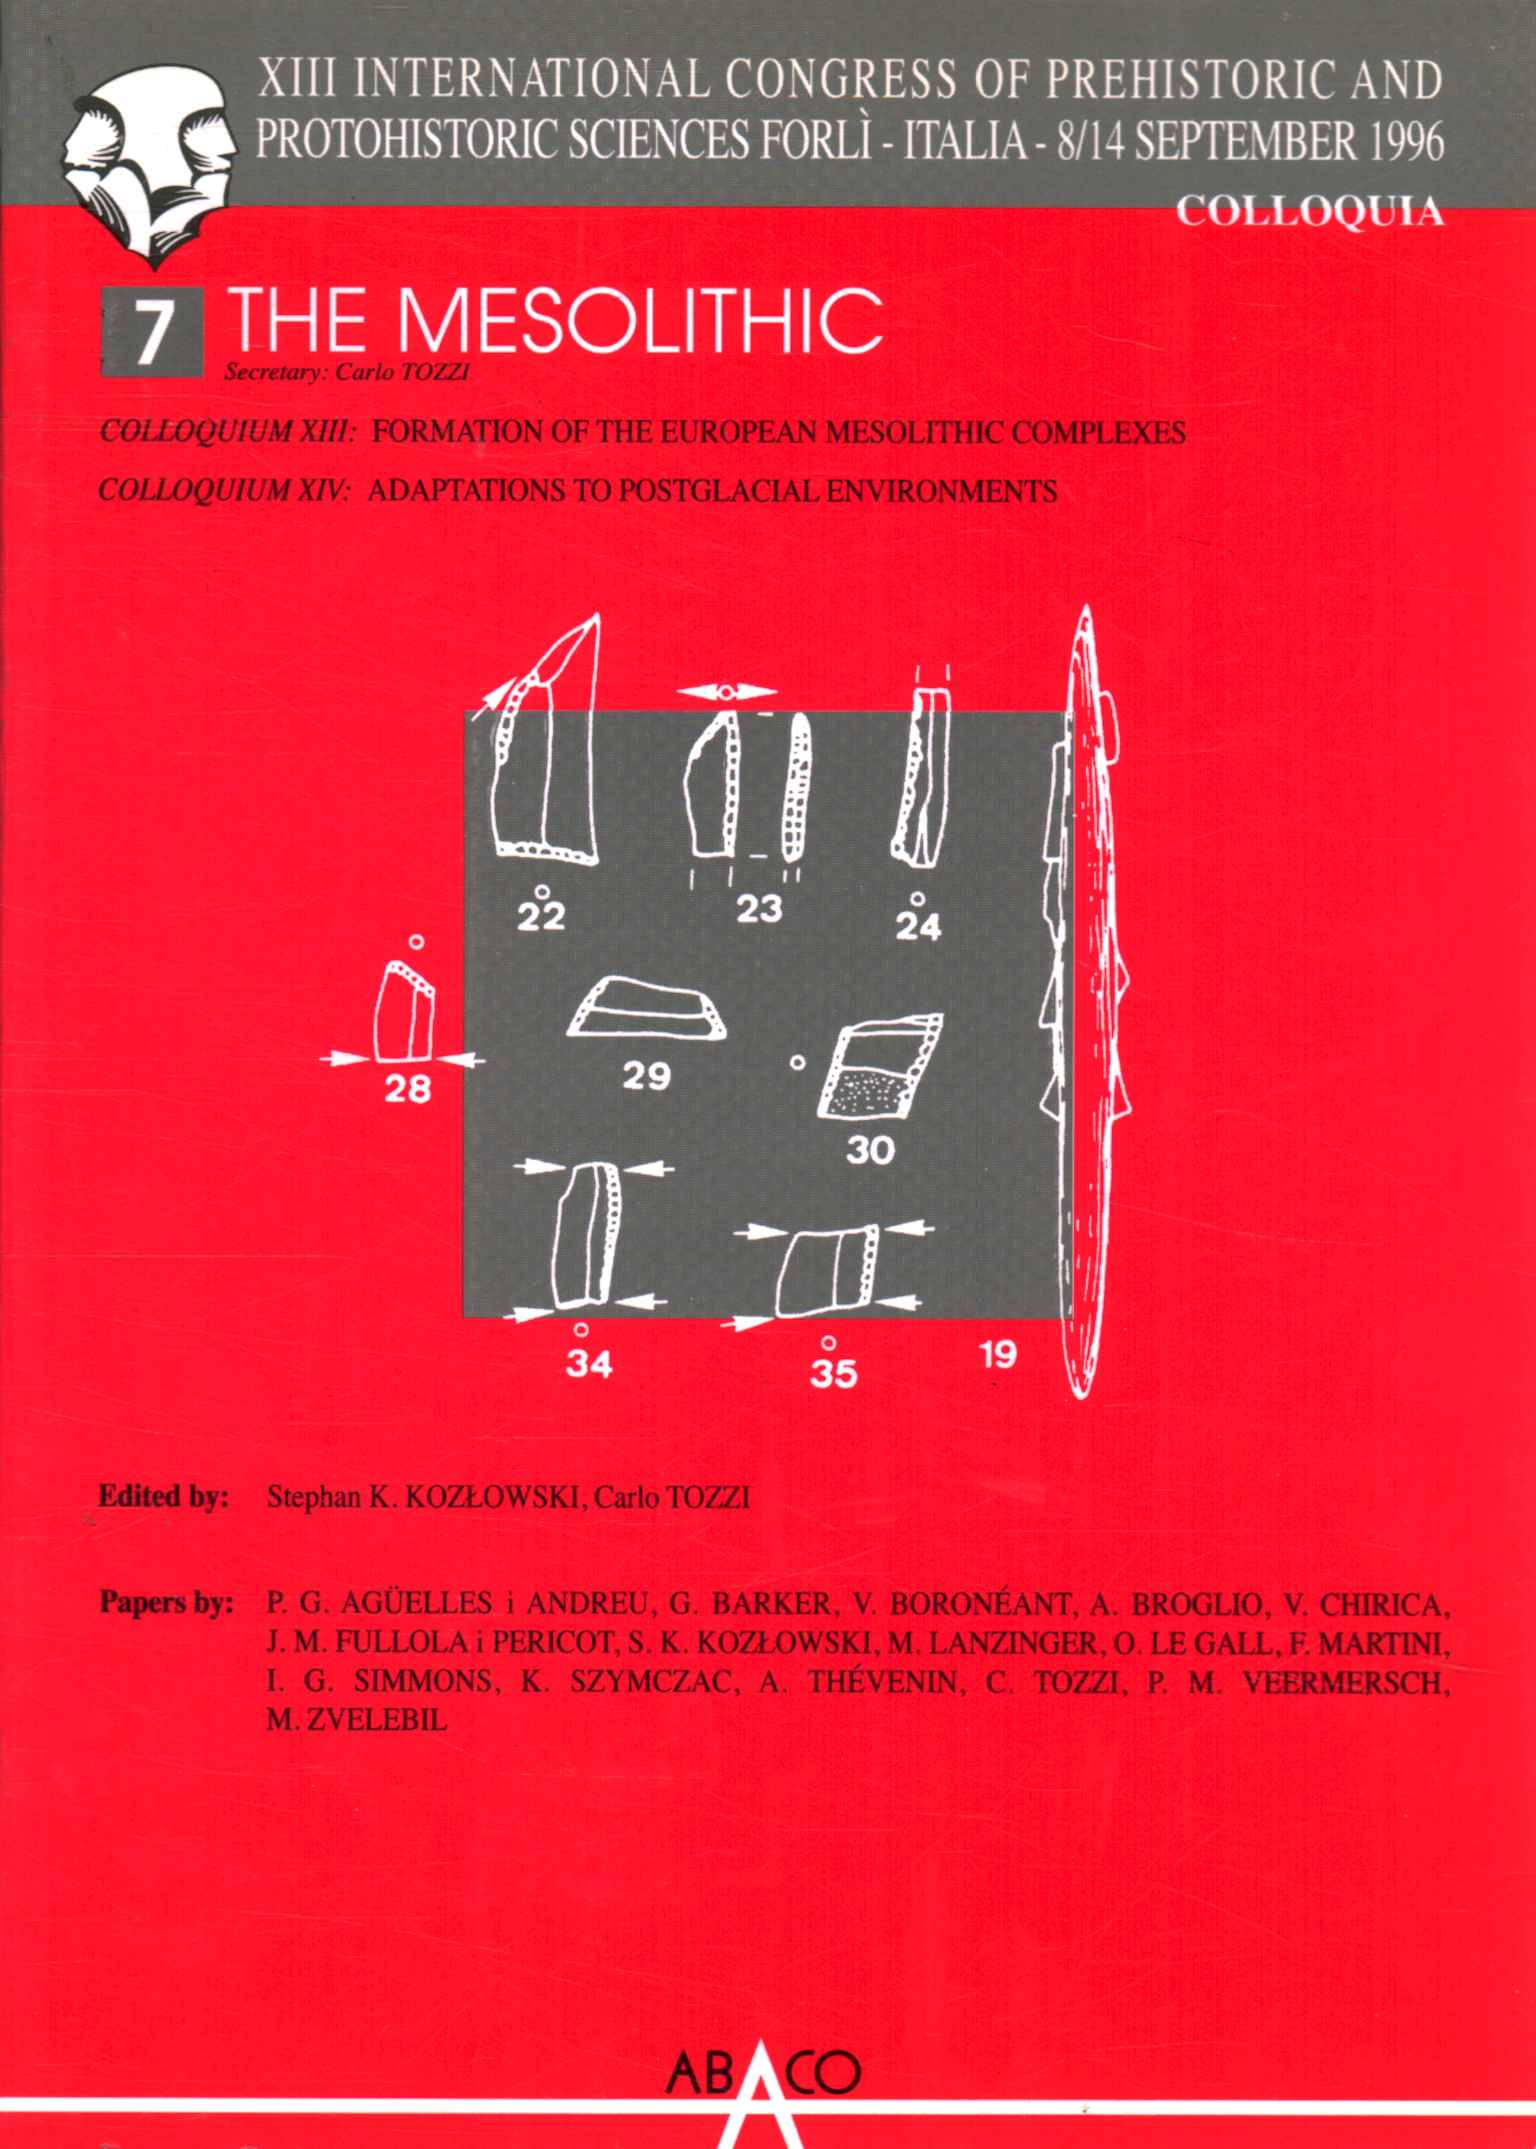 The Mesolithic